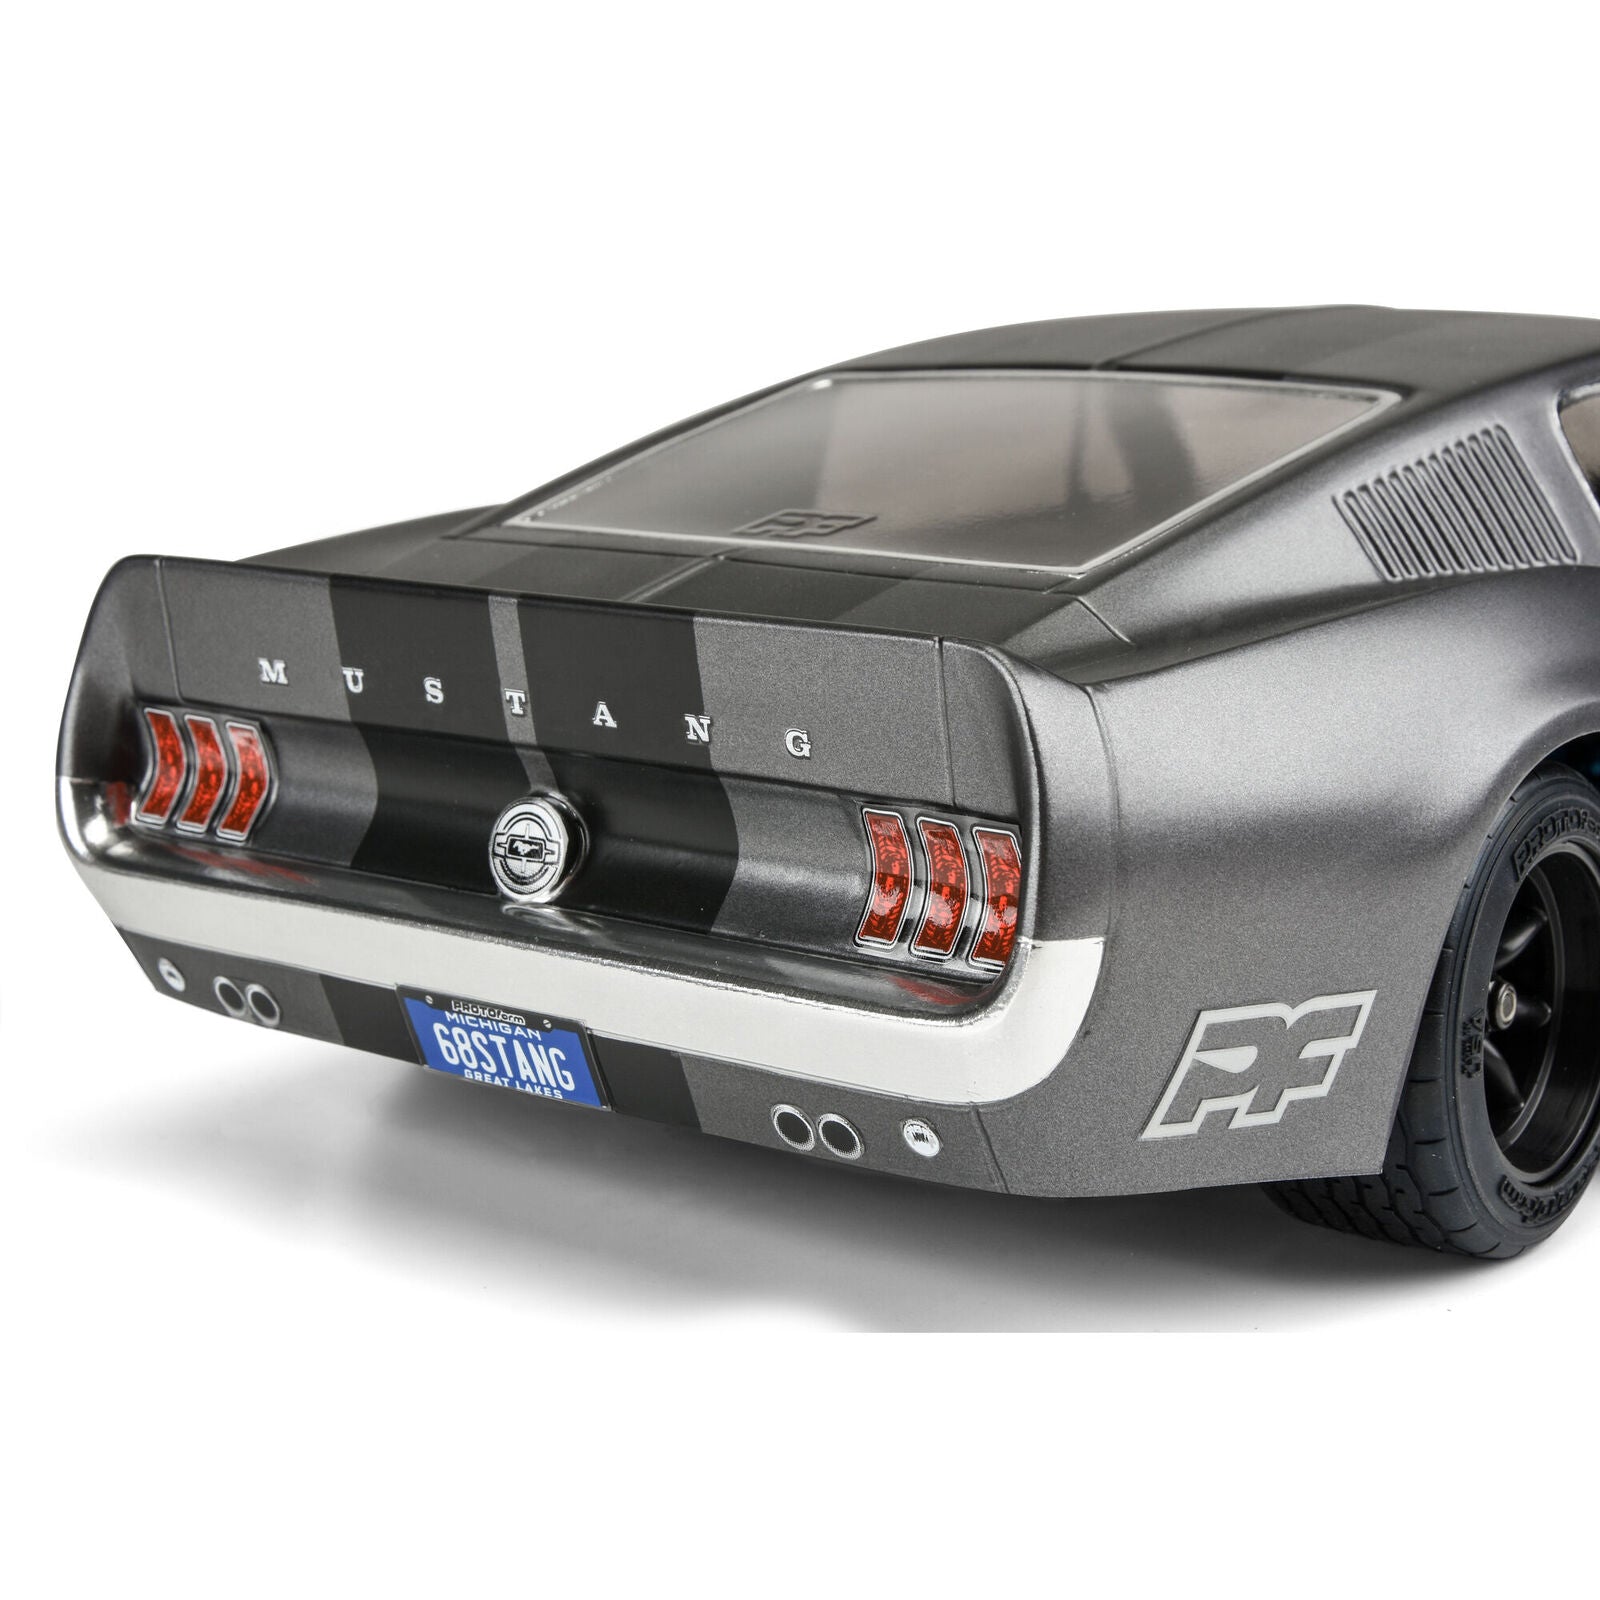 1/10 1968 Ford Mustang Clear Body: Vintage Trans-Am